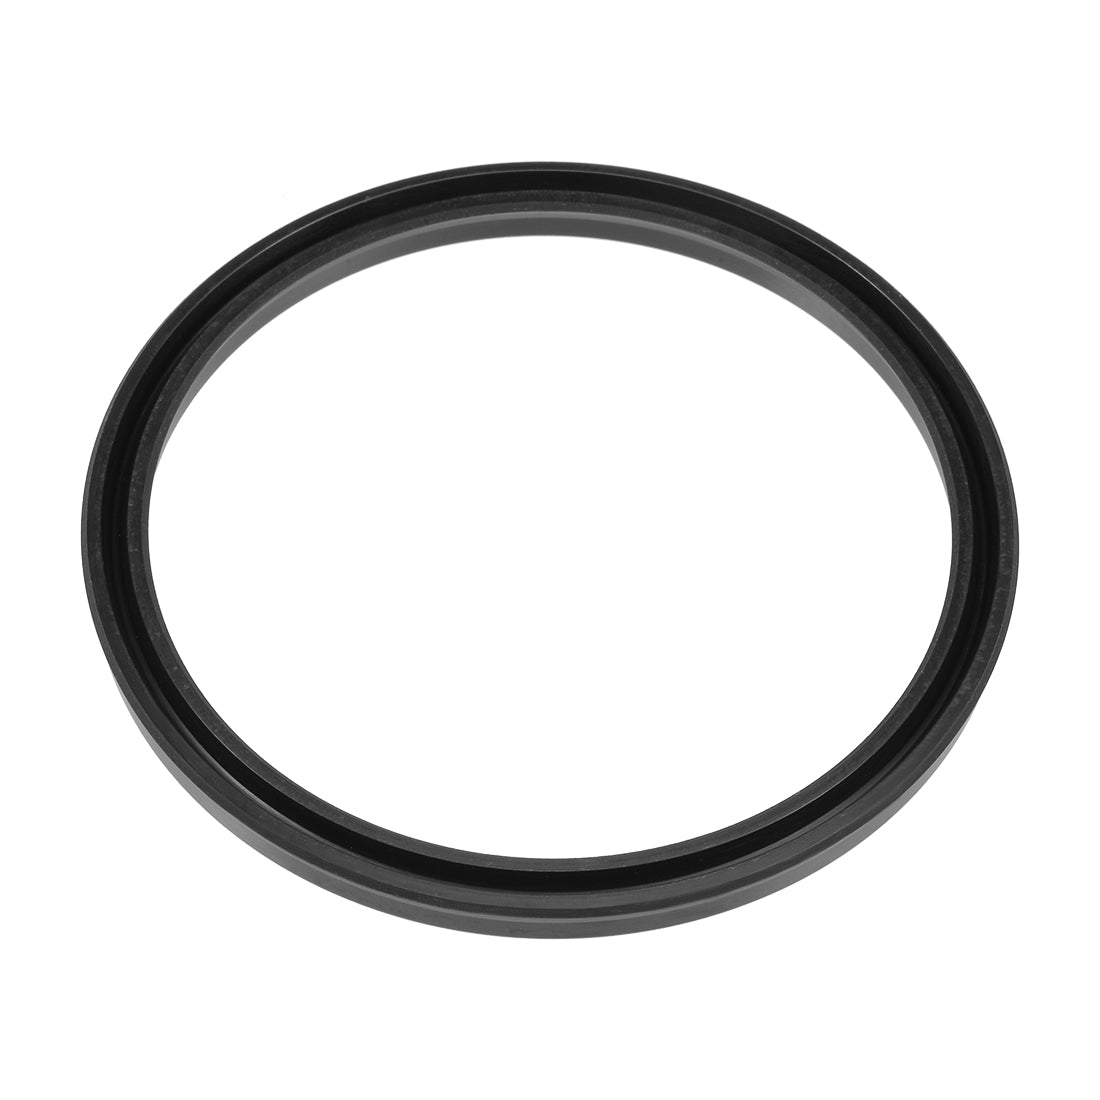 uxcell Uxcell Hydraulic Seal, Piston Shaft USH Oil Sealing O-Ring, 75mm x 85mm x 6mm